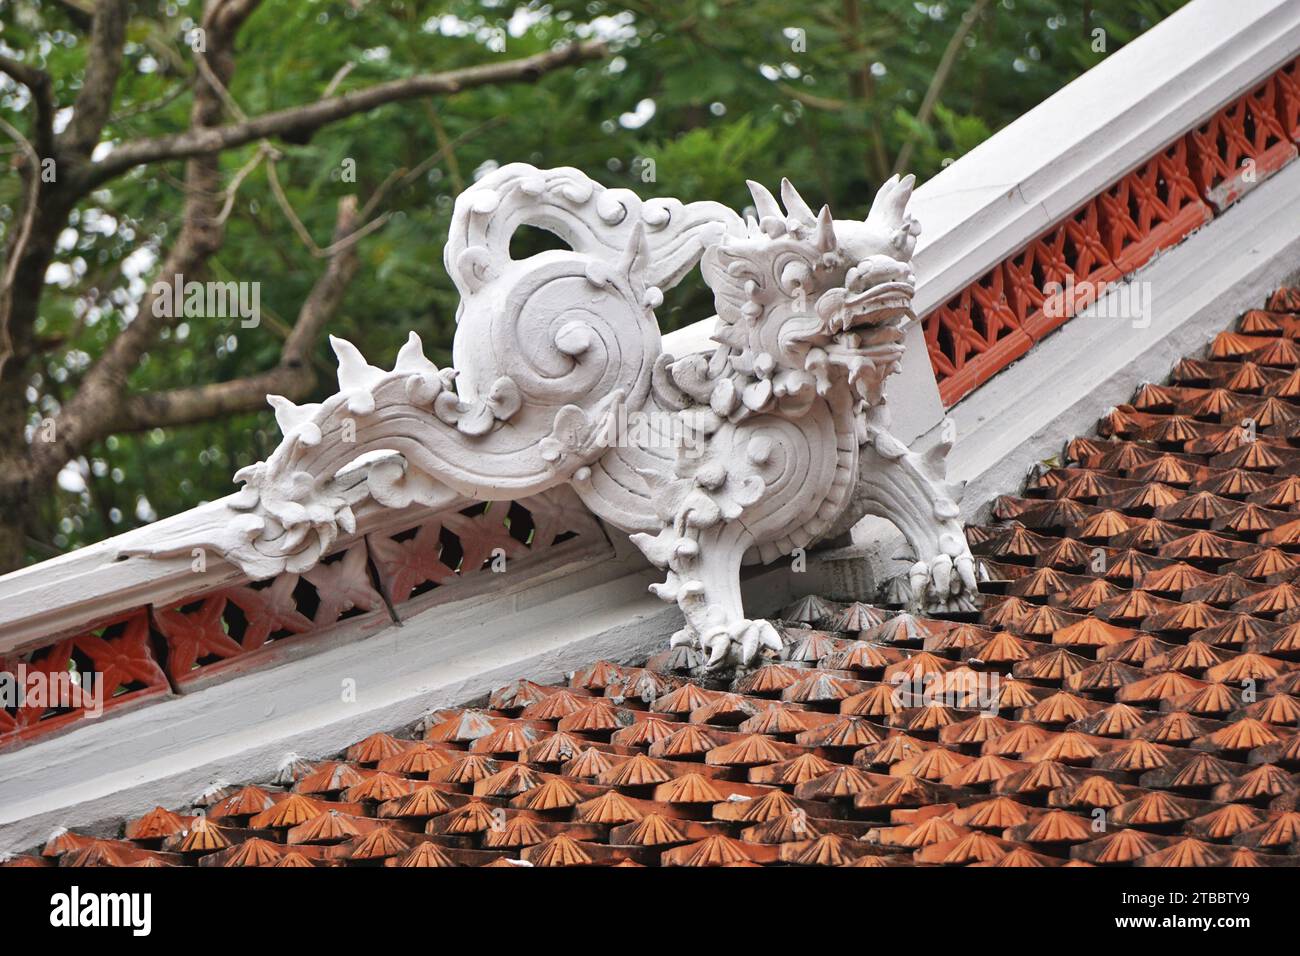 Vintage white dragon sculpture crouches atop a clay tiled roof at a Buddhist temple in Hanoi, Vietnam. Dragon ornaments are a common sight around Asia Stock Photo